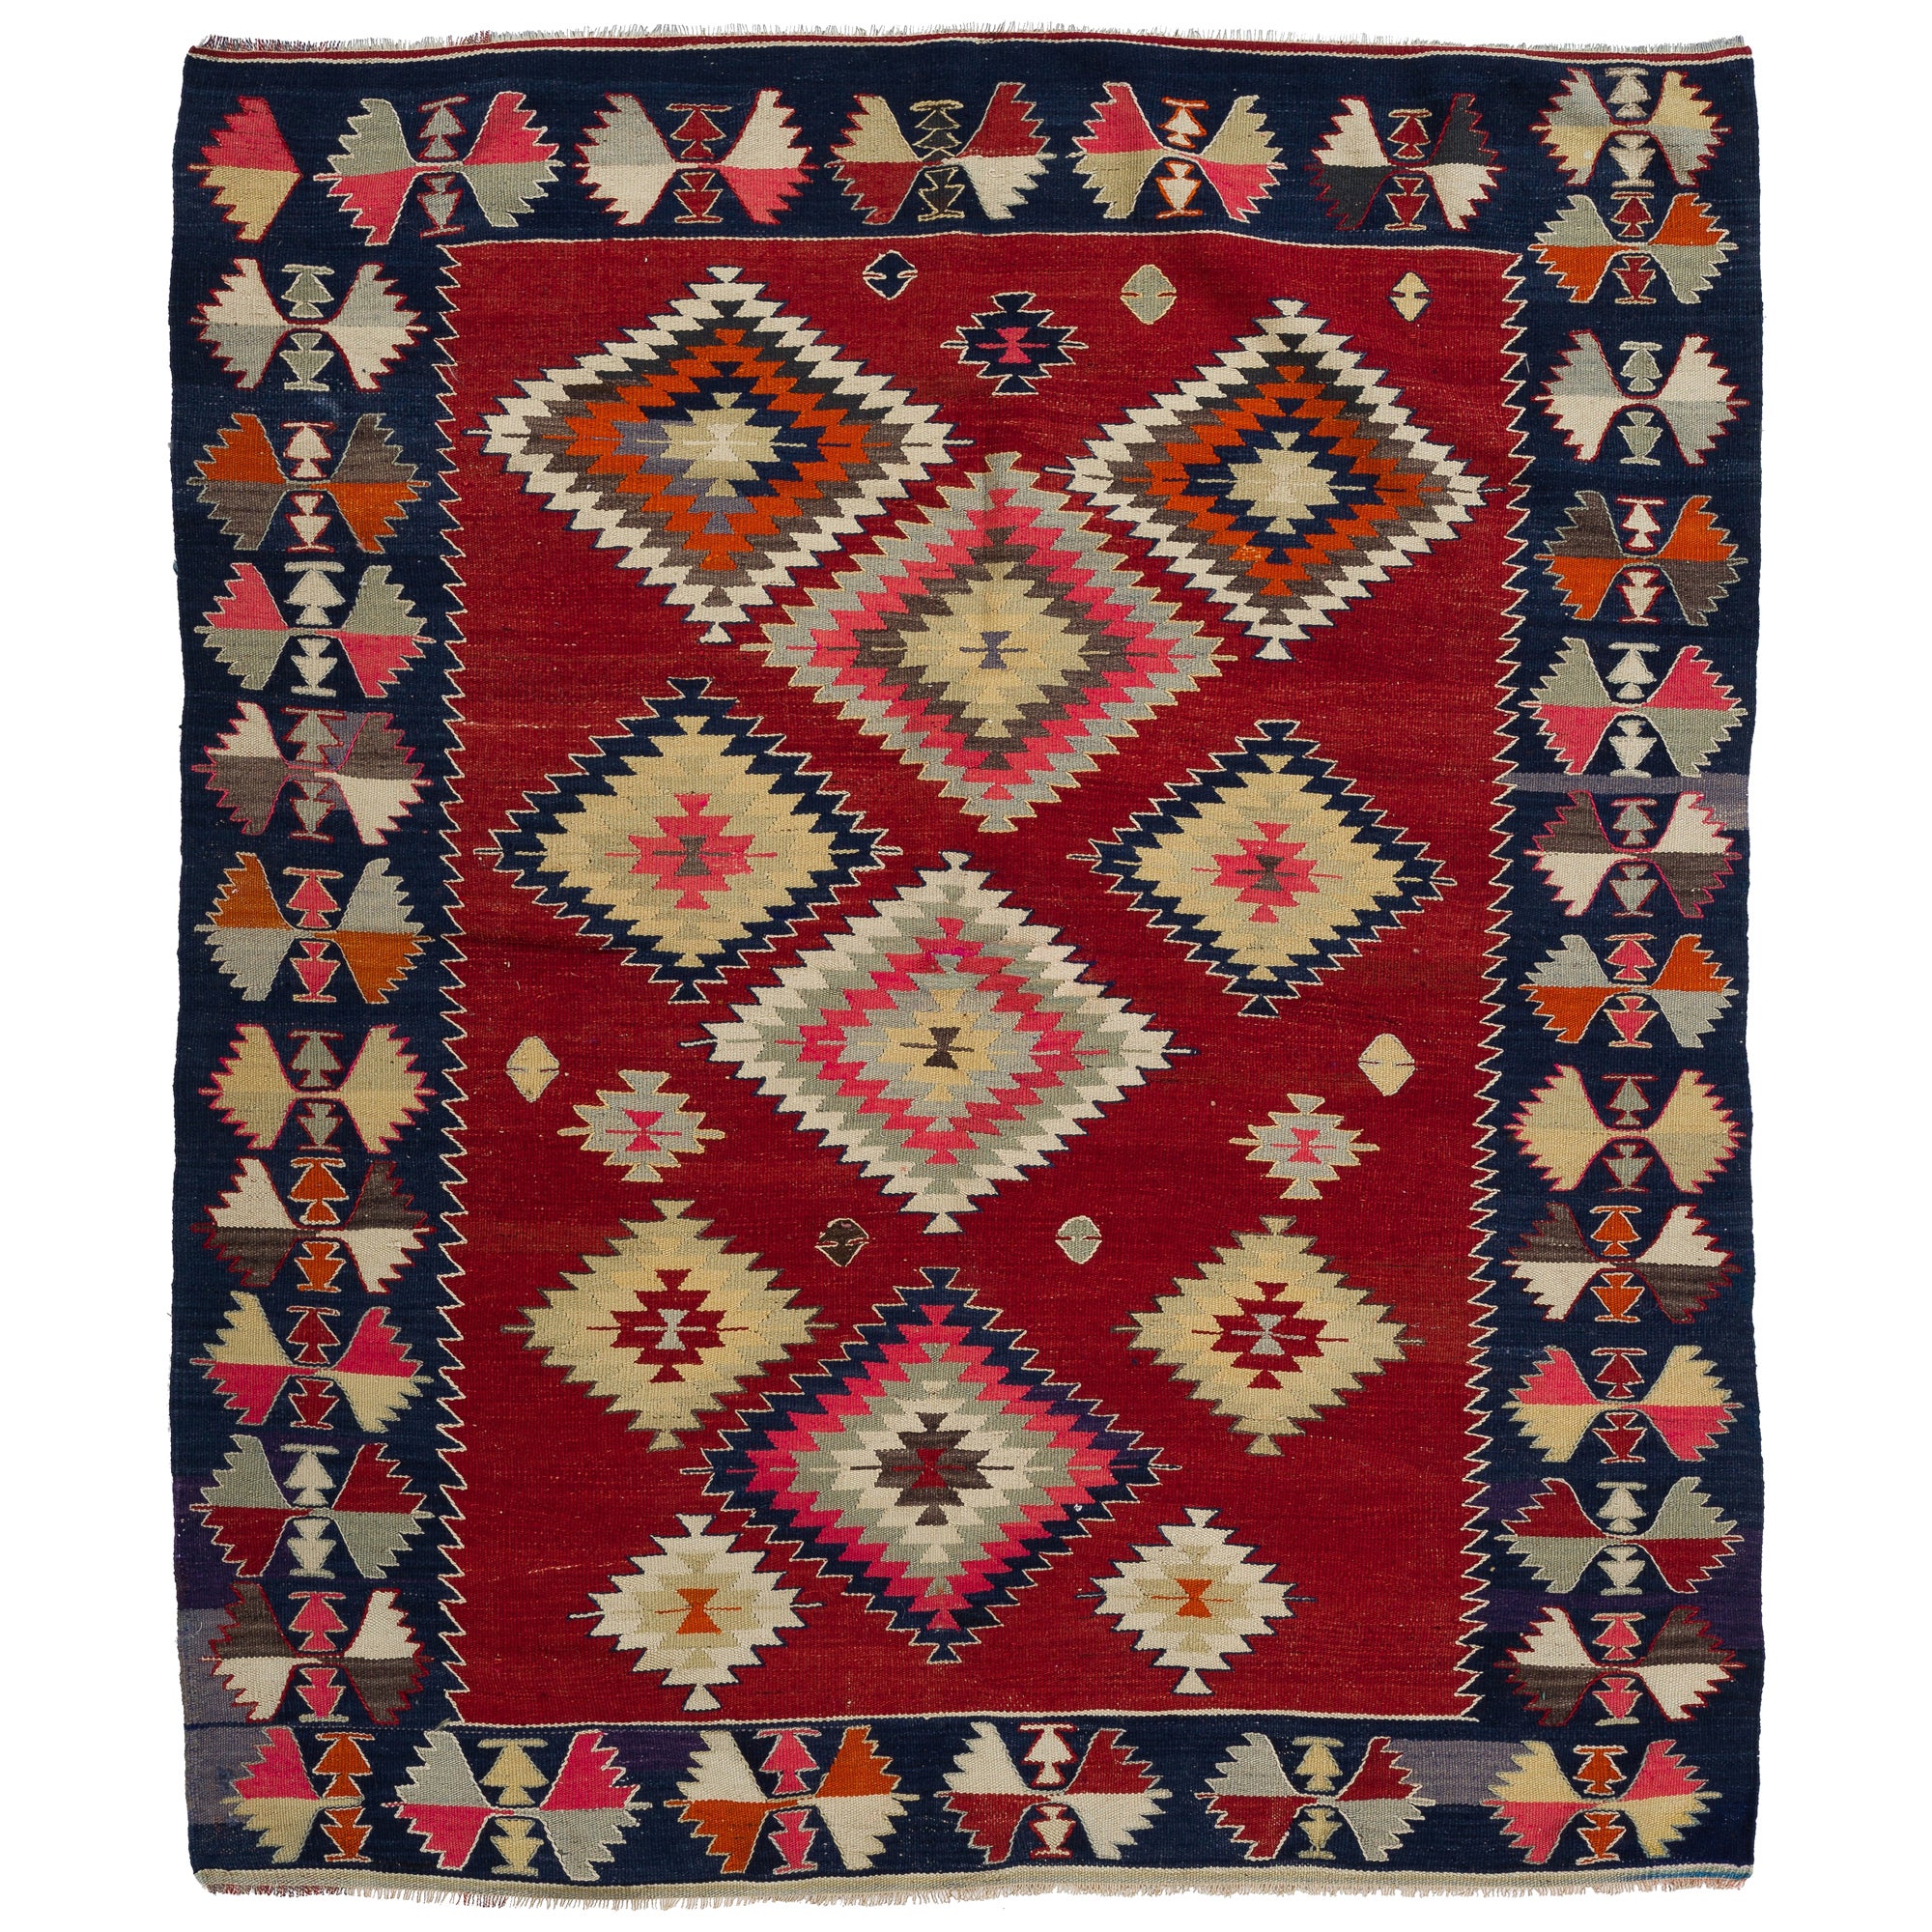 5.8x6.8 Ft Vintage Anatolian Kilim Rug in Red with Geometric Design, 100% Wool